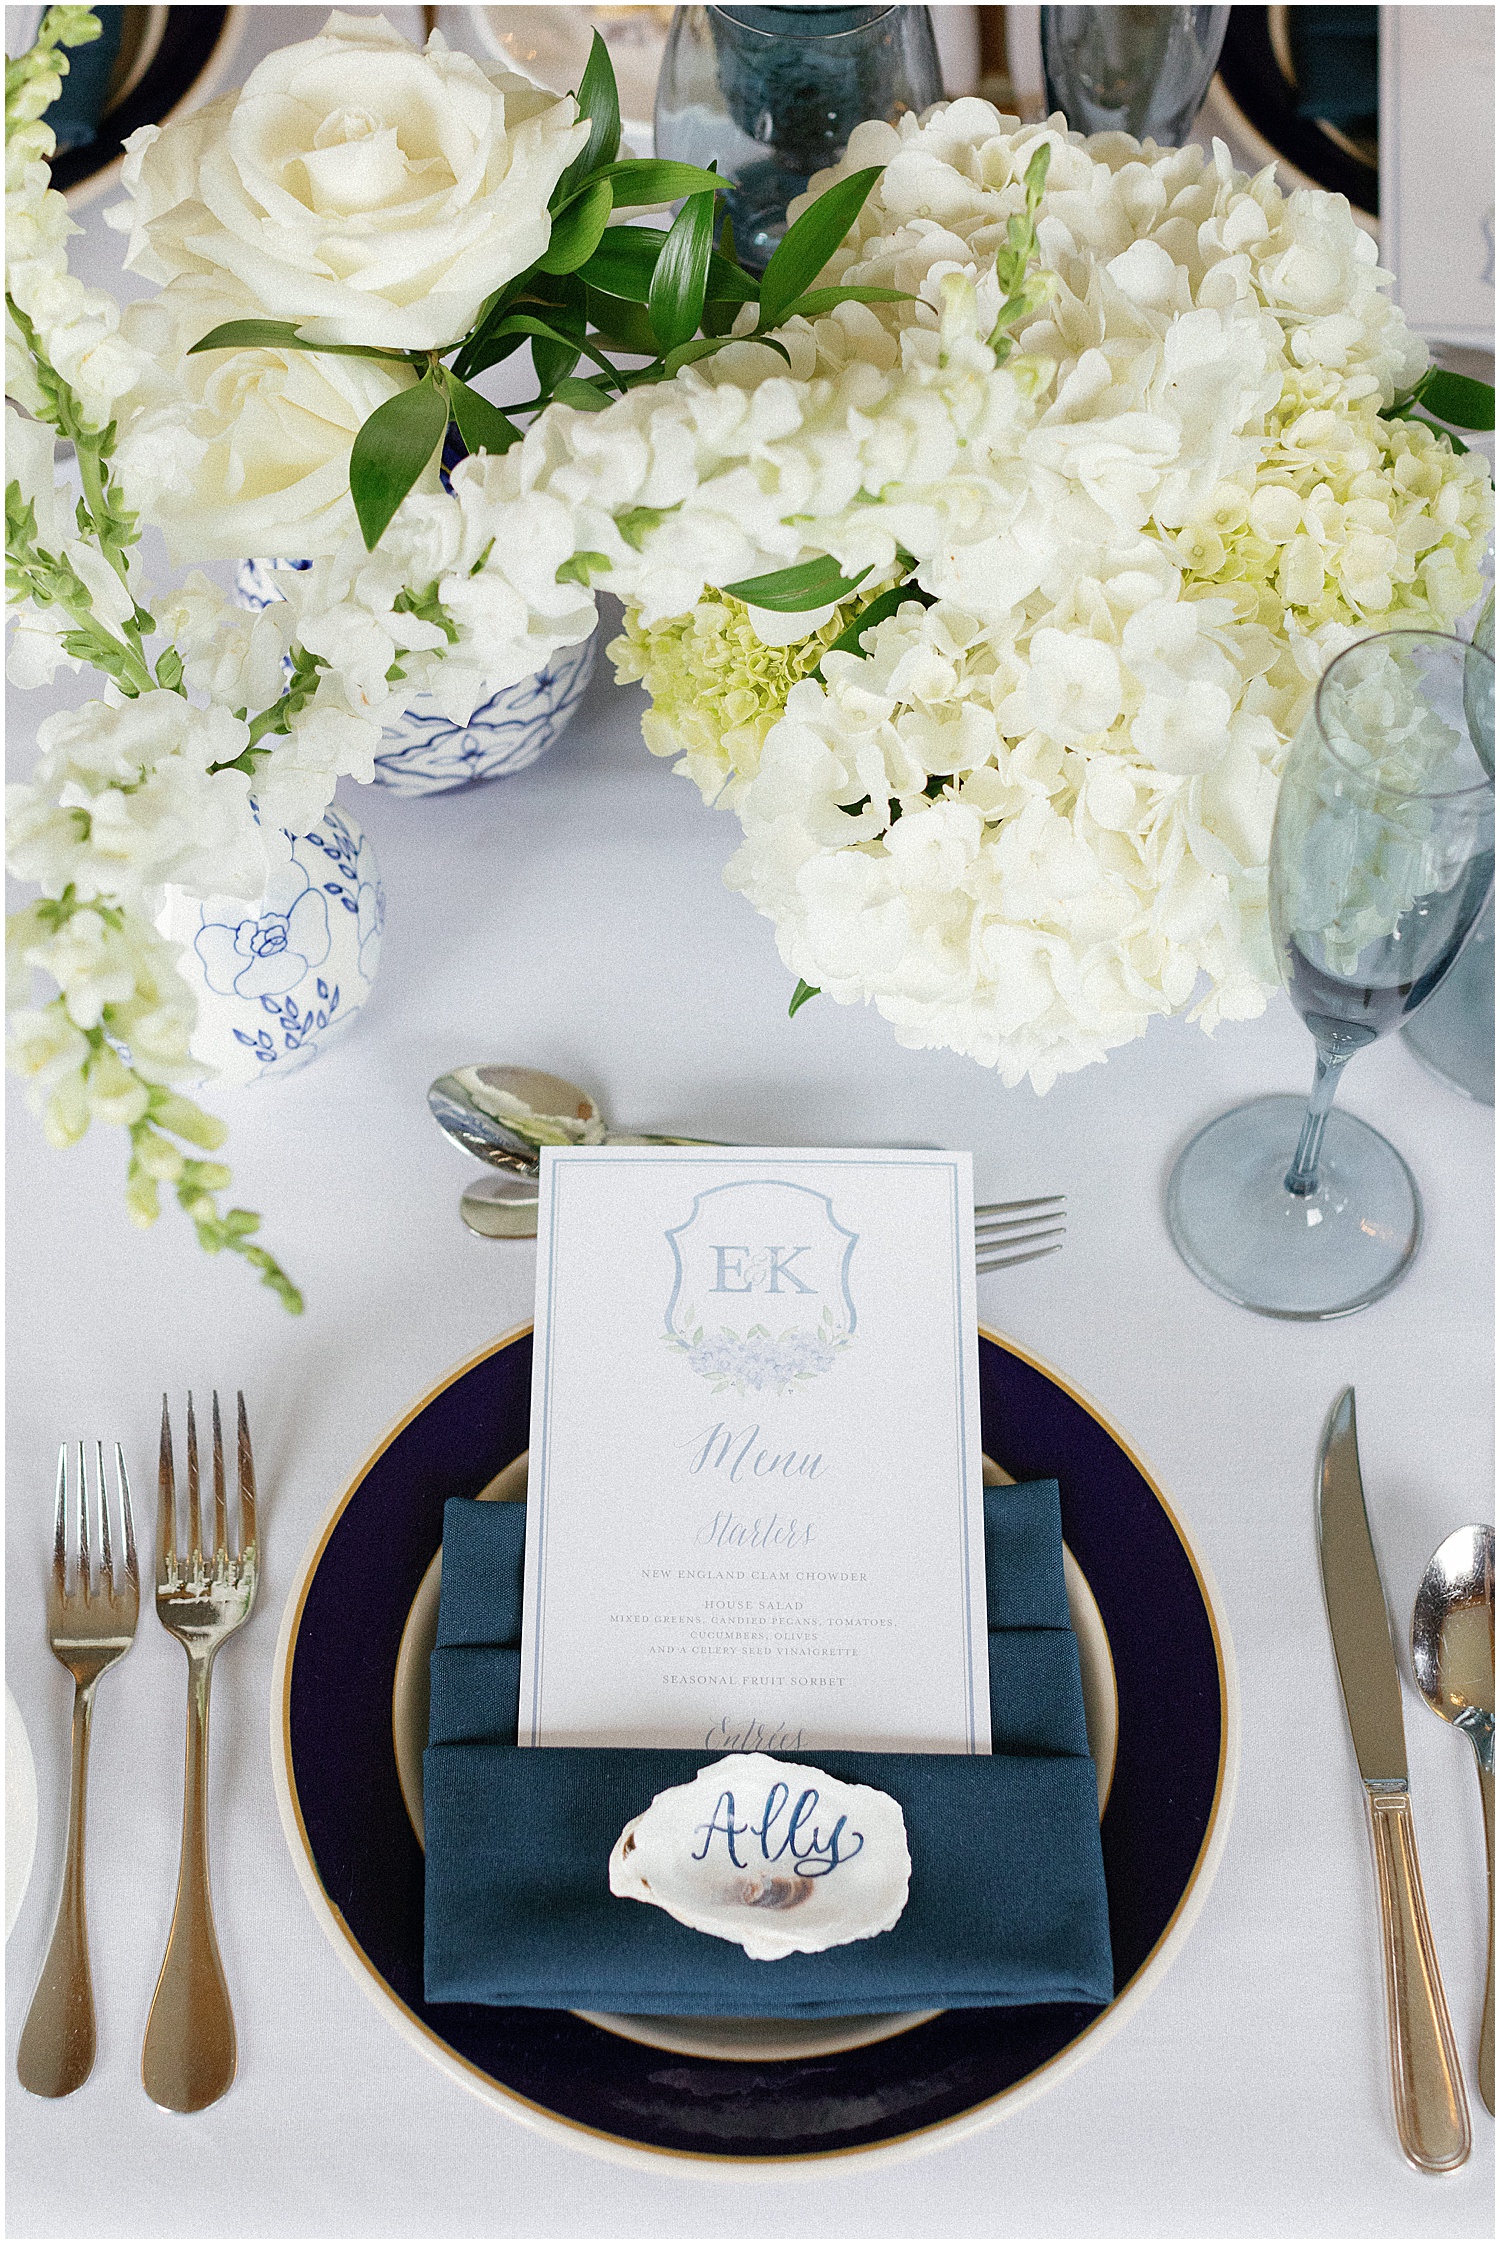 colony hotel maine wedding with blue toile and ginger jar decor, menus and calligraphy by mulberry & elm